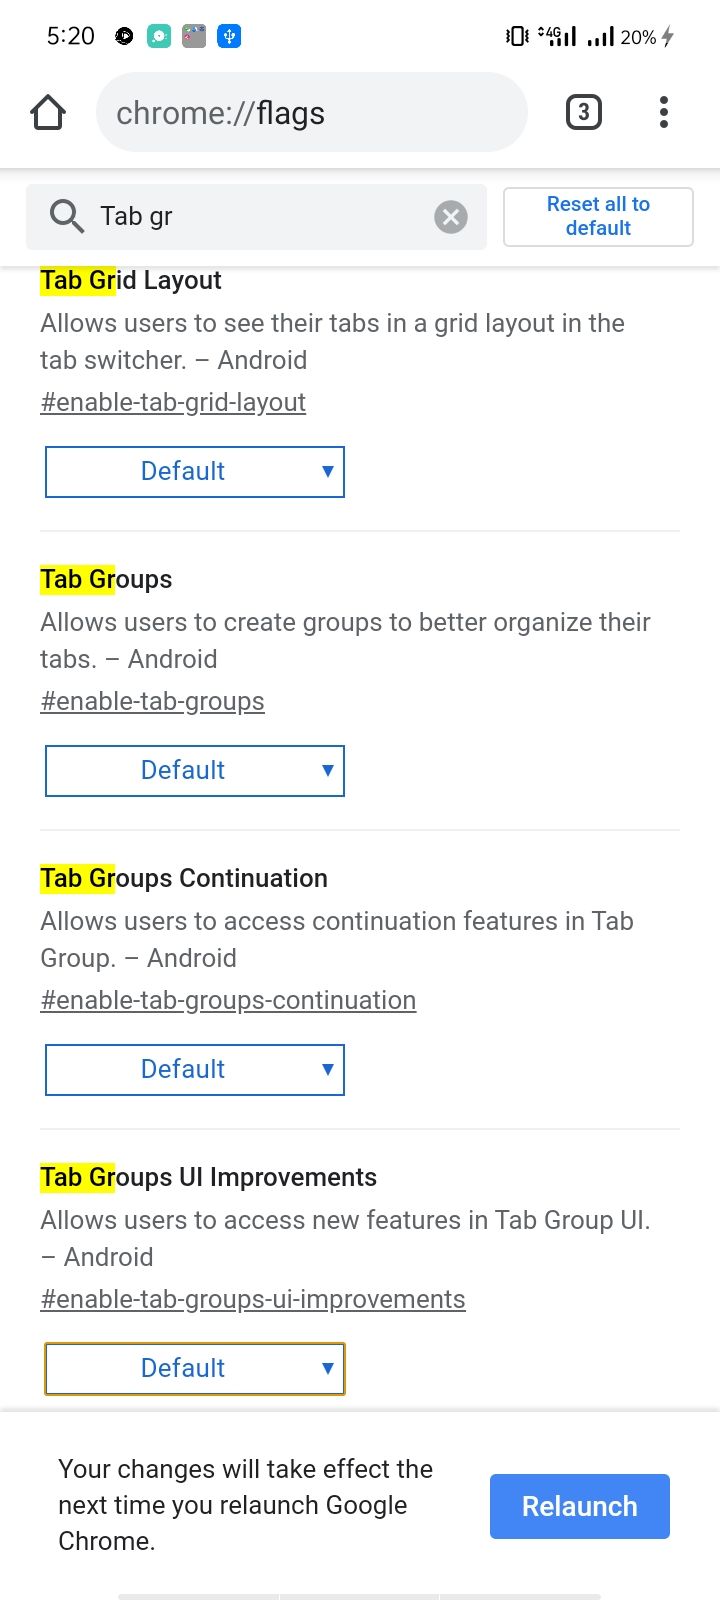 Changing Tab Flags Status Back To Default On Chrome Flags Page